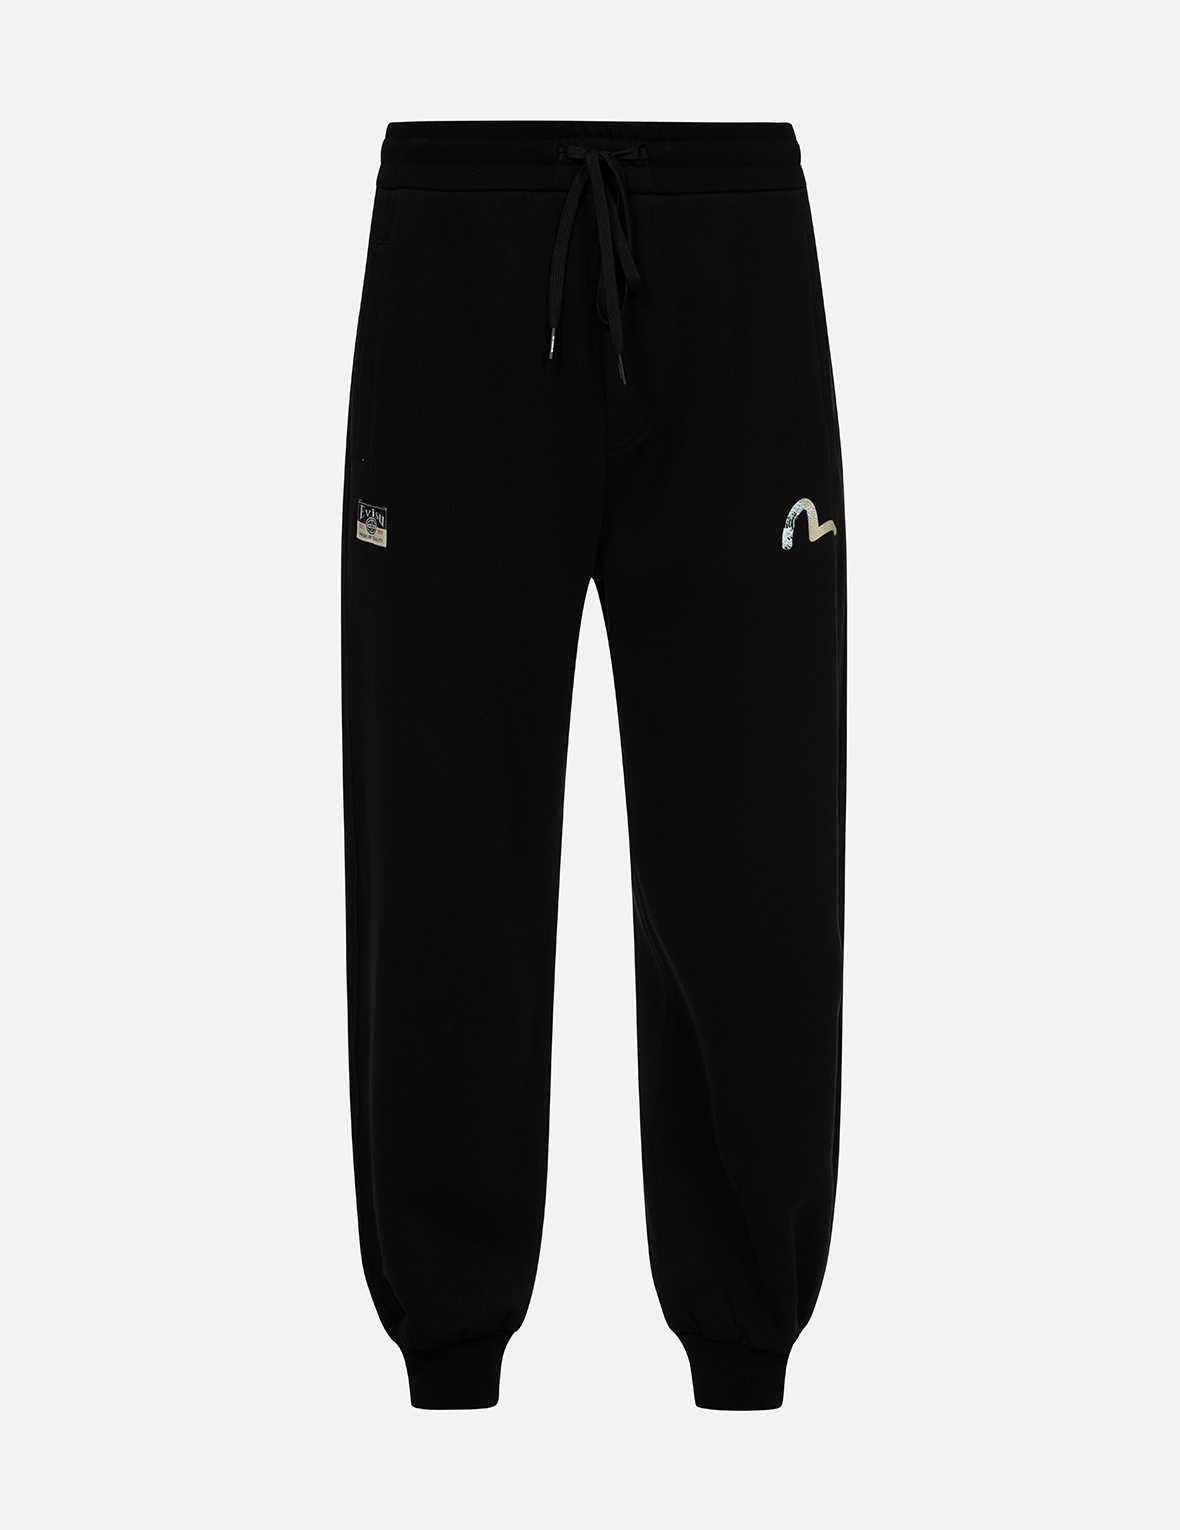 KAMON AND THE GREAT WAVE DAICOCK PRINT RELAX FIT SWEATPANTS - 2